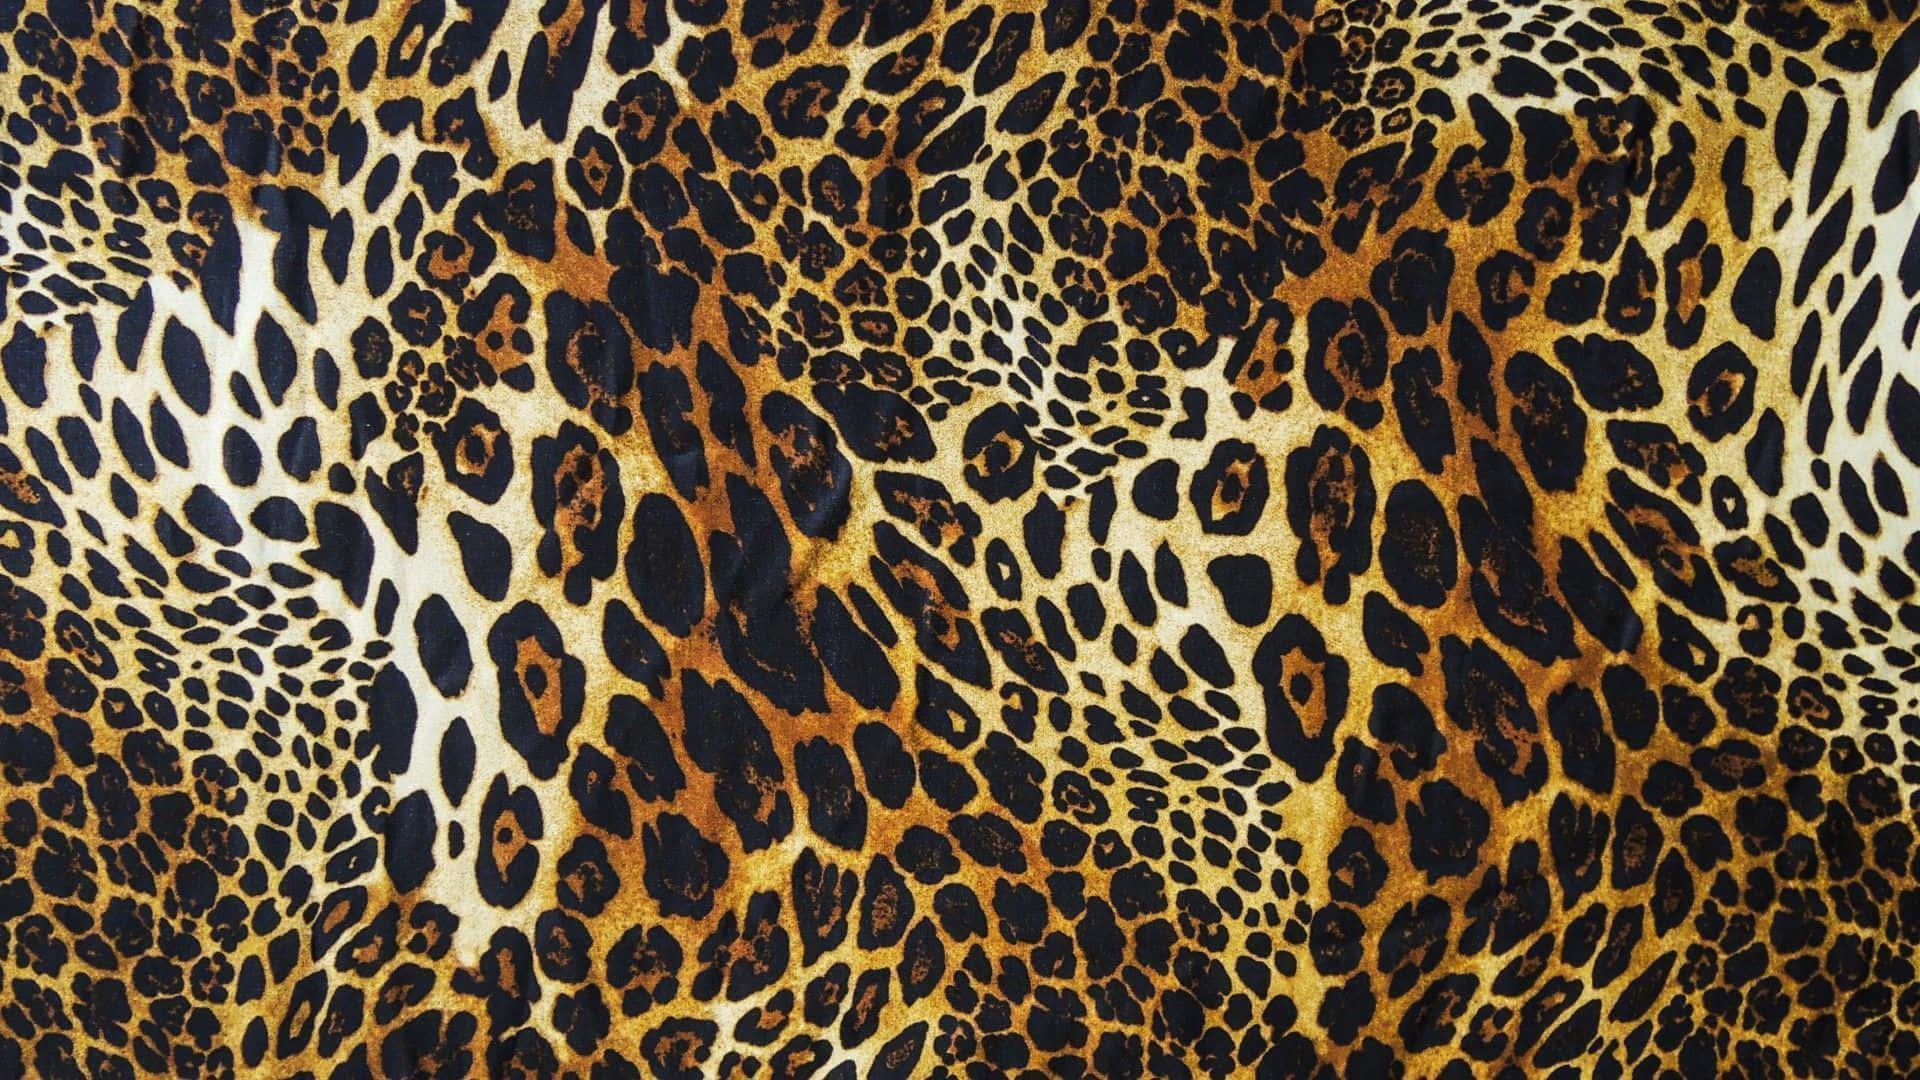 A Leopard Print Fabric With Black And Brown Spots Wallpaper